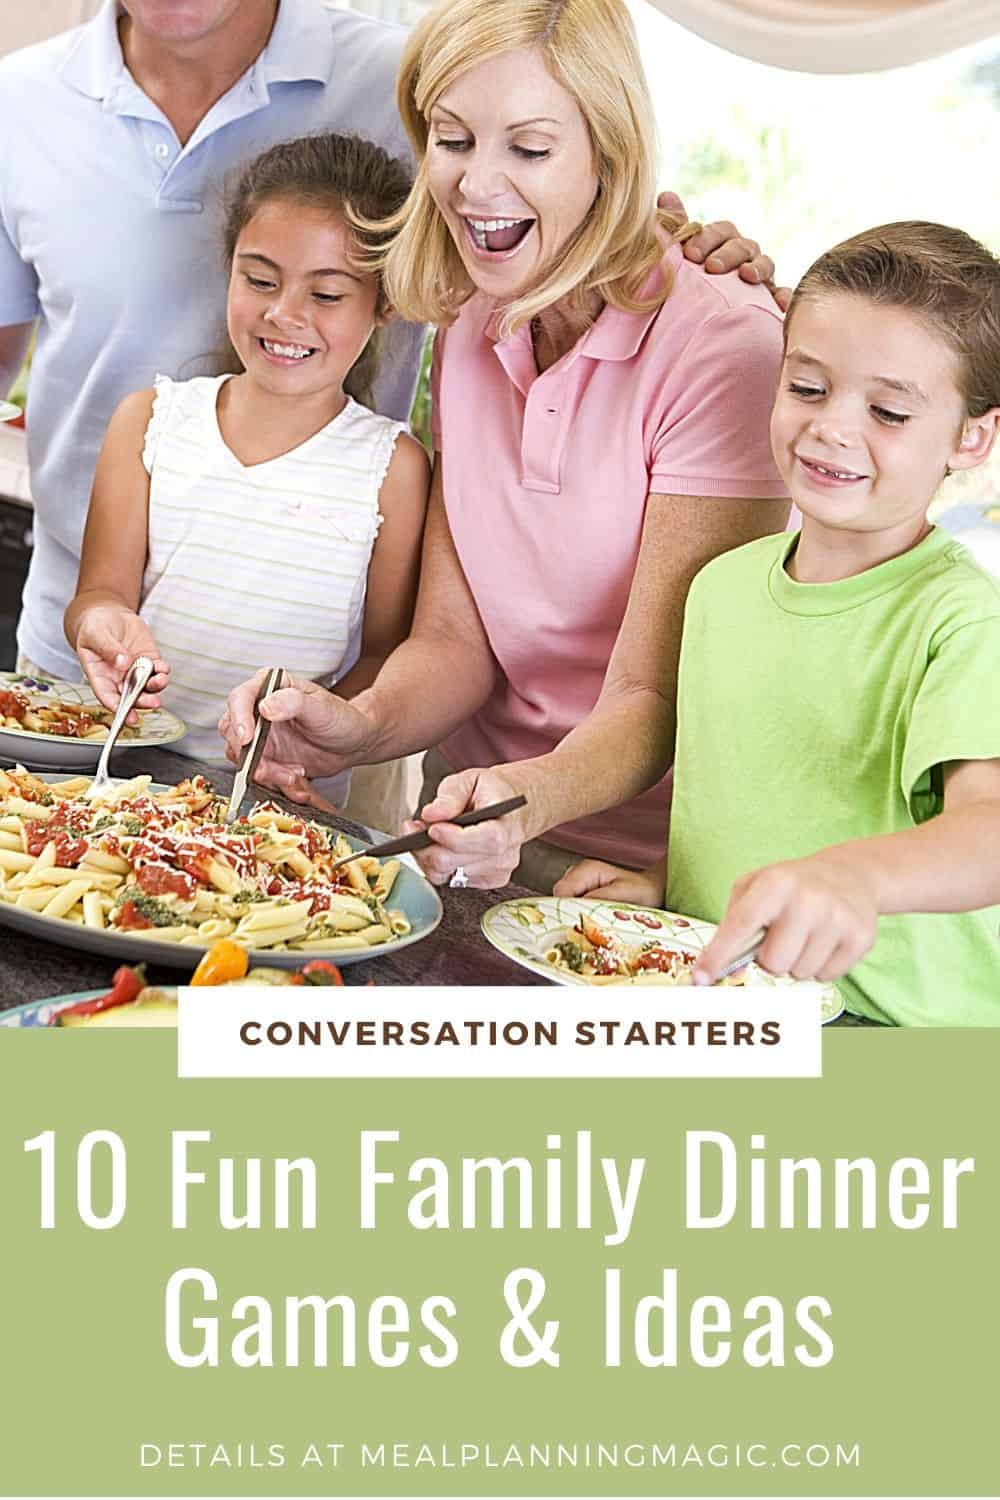 10 Fun Family Dinner Games and Ideas - Meal Planning Magic